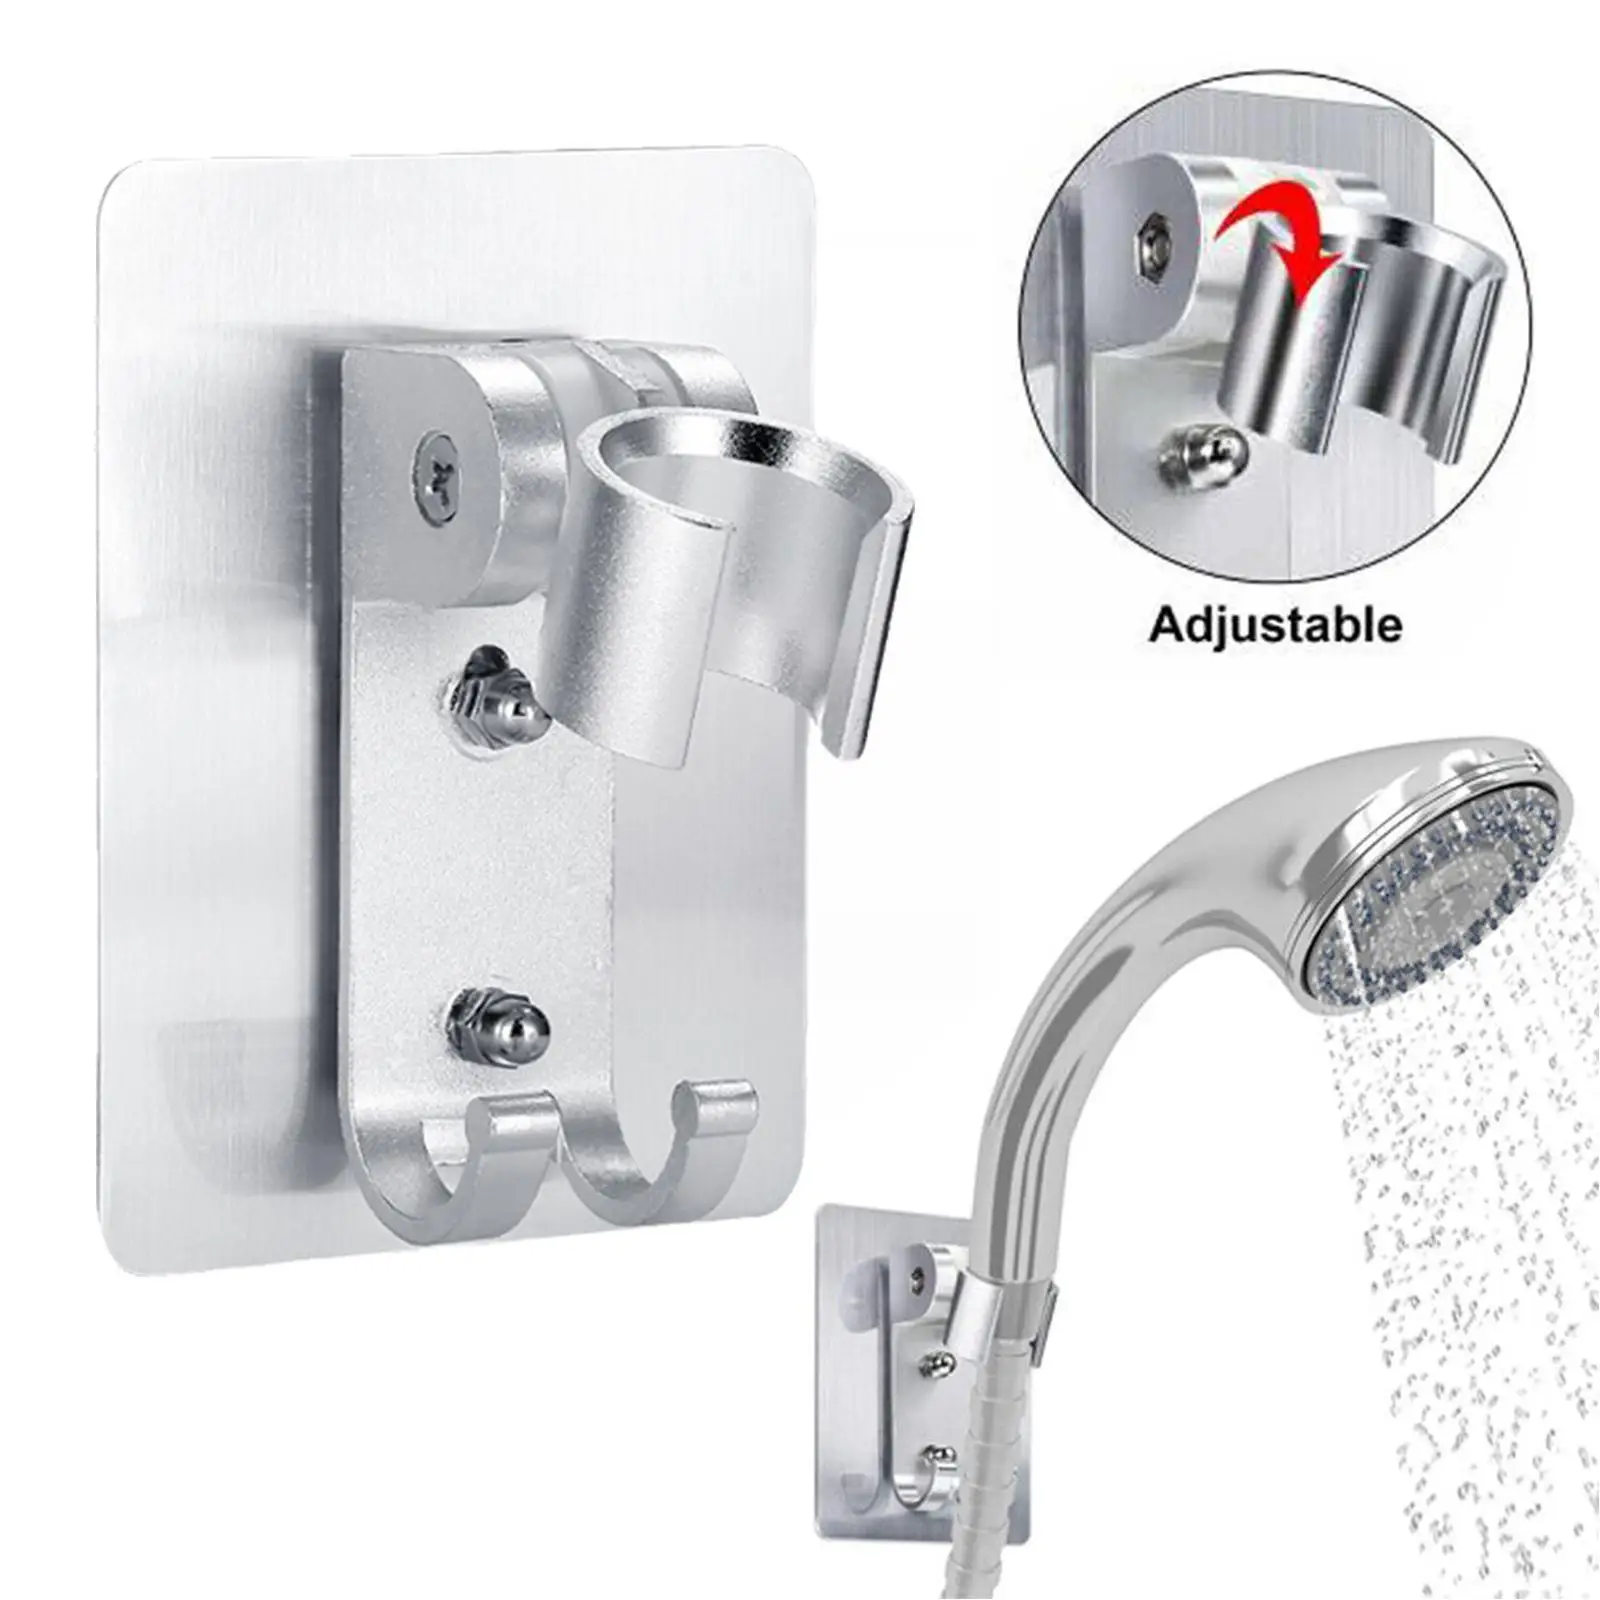 

90° Strong Adhesive Aluminum Wall Gel Mounted Shower Bracket Bathroom Holder Adjustable Portable Stand Accessories Head H0W4